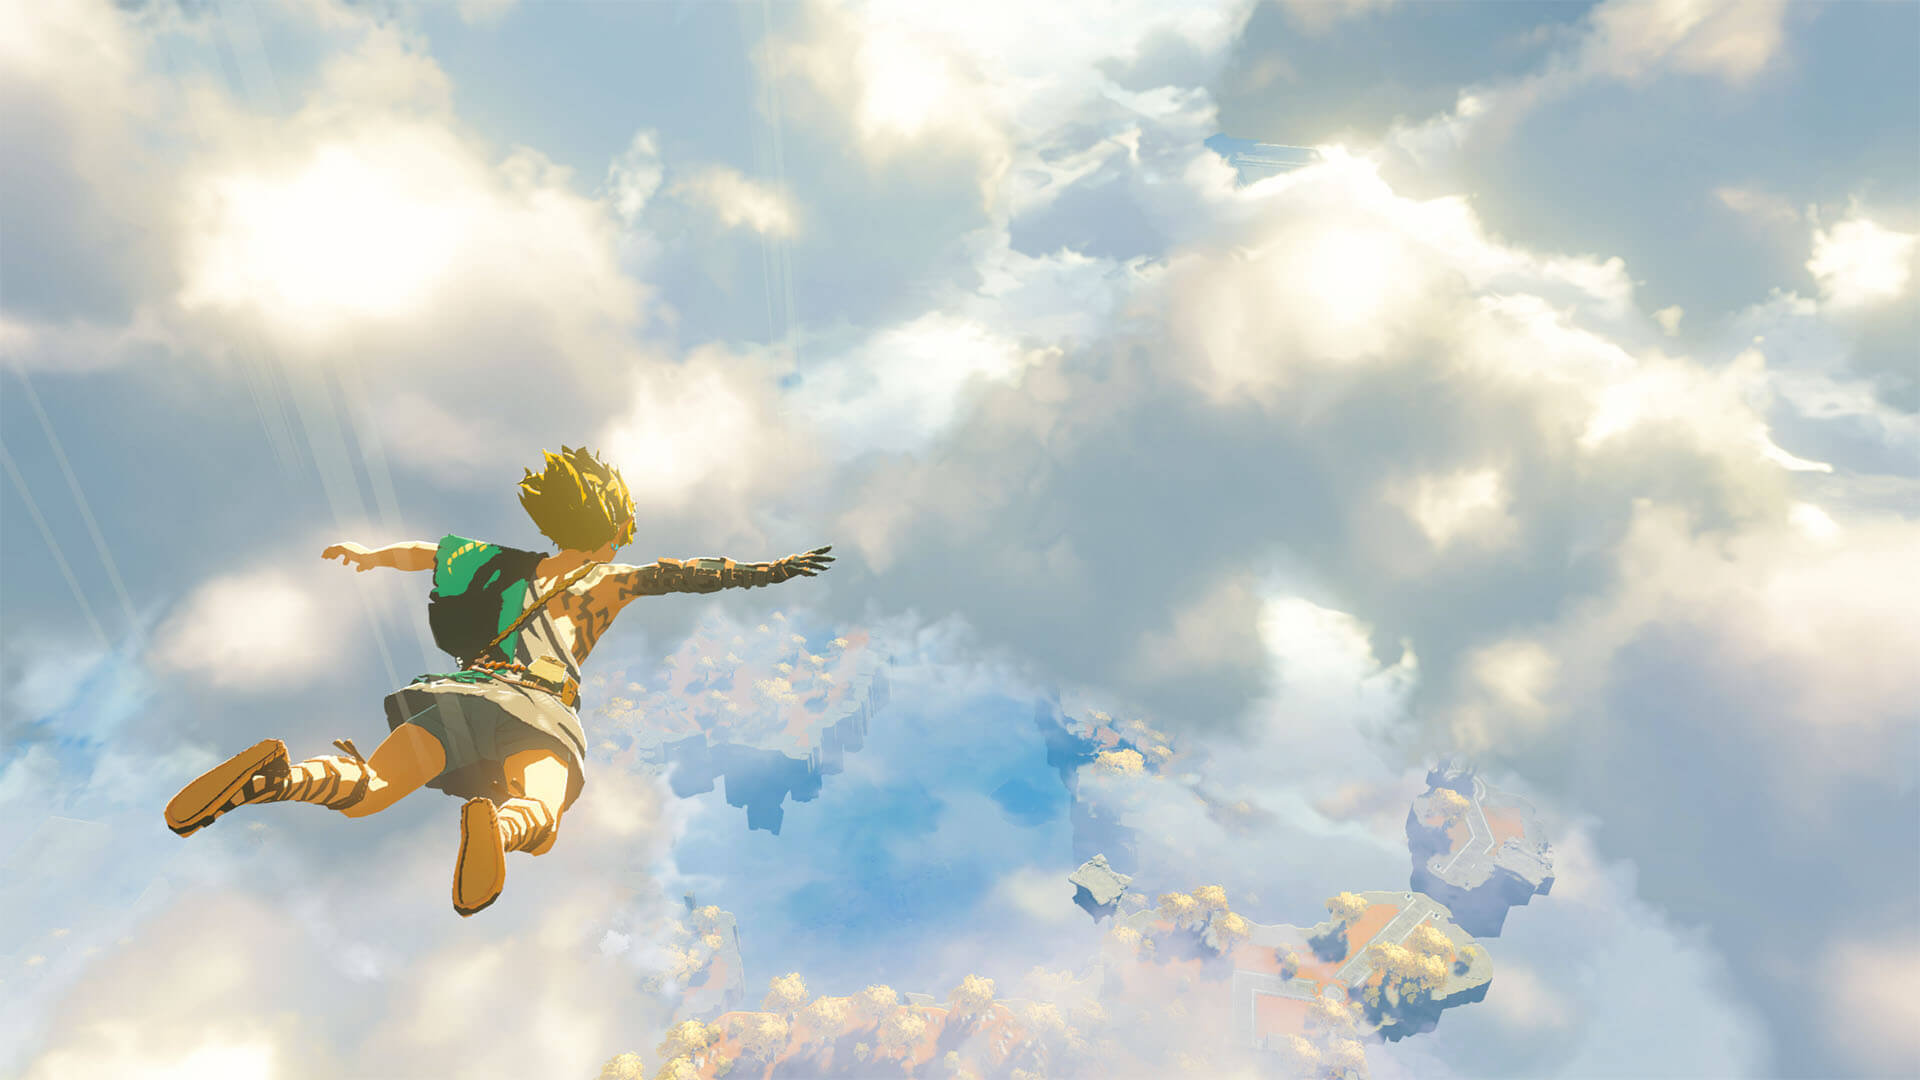 Link plummeting through the air in the Breath of the Wild sequel